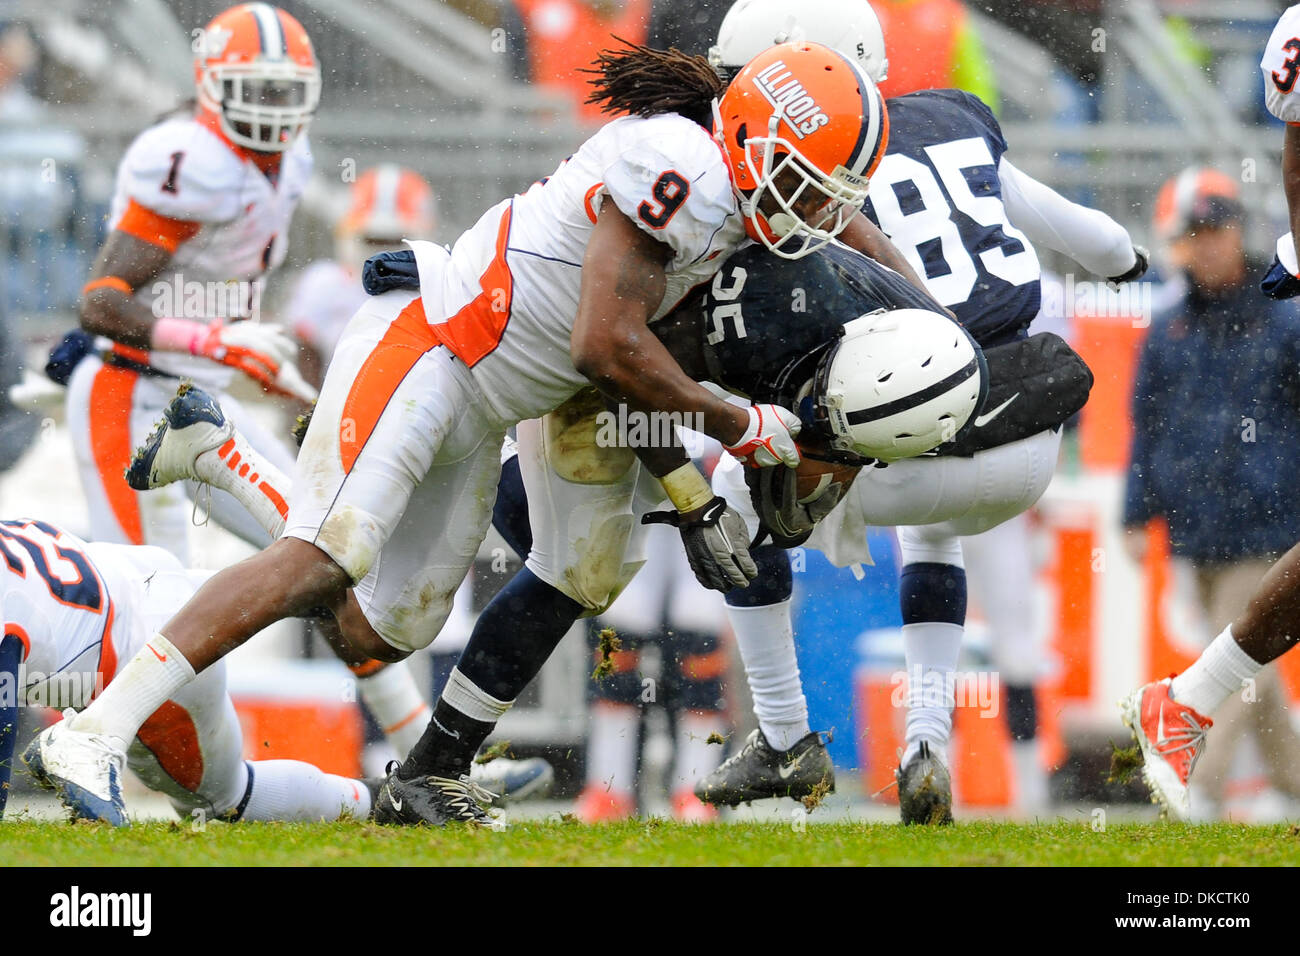 Oct. 29, 2011 - State College, Pennsylvania, United States of America - Penn State running back Silas Redd (25) is tackled by Illinois defender Trulon Henry (9) during a Big 10 matchup at Happy Valley.  Penn State and Illinois are scoreless at the half. (Credit Image: © Brian Freed/Southcreek/ZUMAPRESS.com) Stock Photo